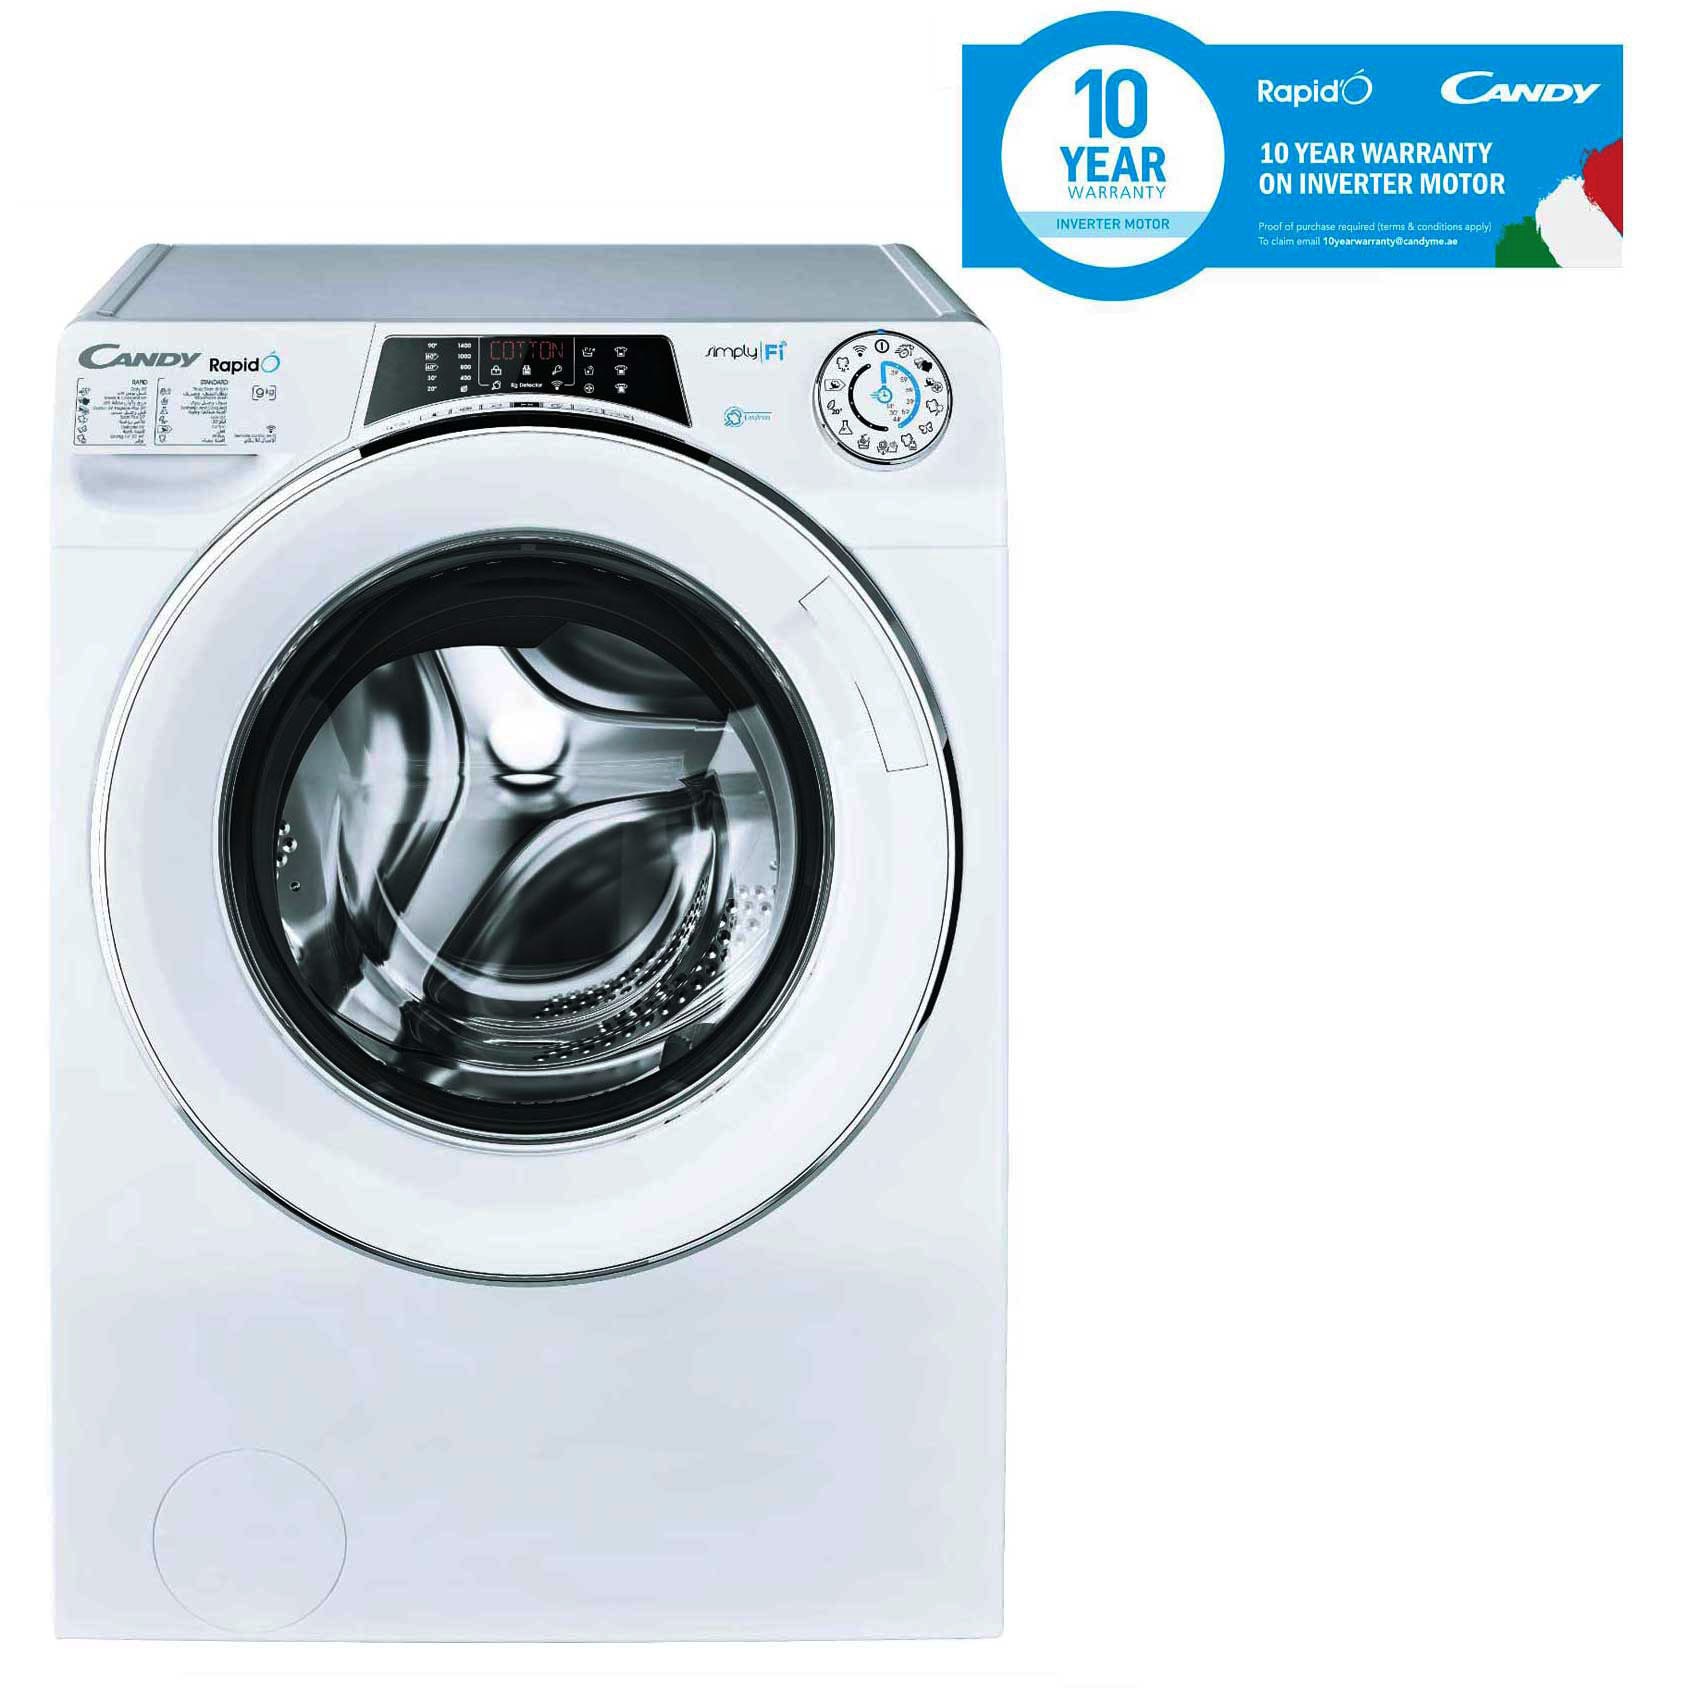 Buy Candy Rapid O Washing Machine 9kg Ro1496dwhc7 1 19 1400rpm White Wifi Bt Steam Function Mix Power System 6 Digit Display Online Shop Electronics Appliances On Carrefour Uae